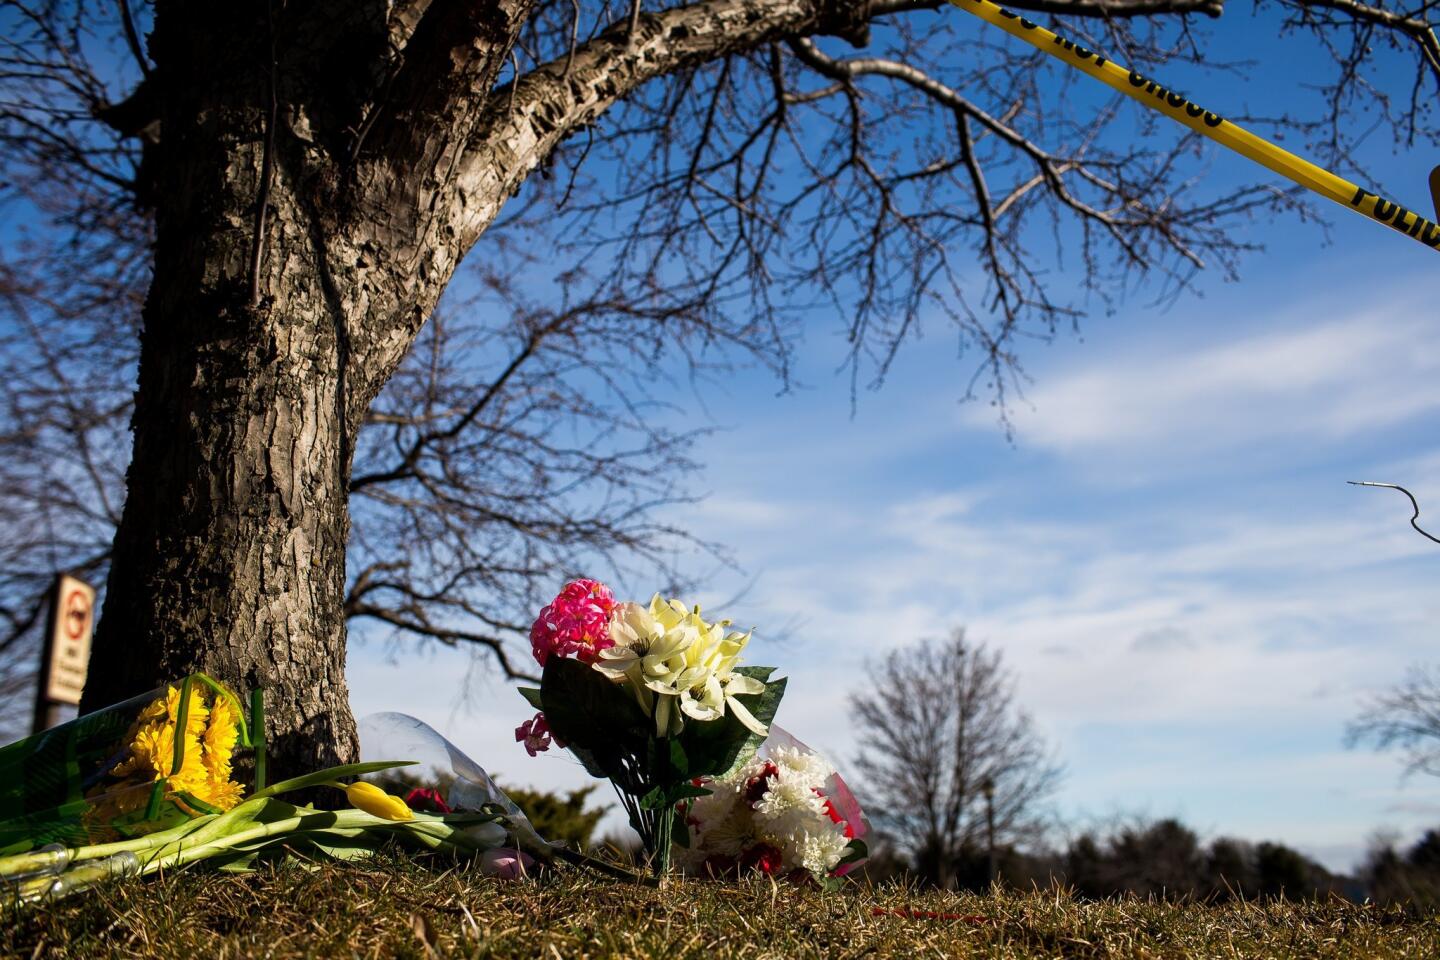 Flowers lie near a makeshift memorial outside a Cracker Barrel restaurant in Kalamazoo, Mich. According to police, a man drove around Kalamazoo fatally shooting several people at multiple locations on Saturday, including the parking lot of the restaurant. Authorities identified the shooter as Jason Dalton.